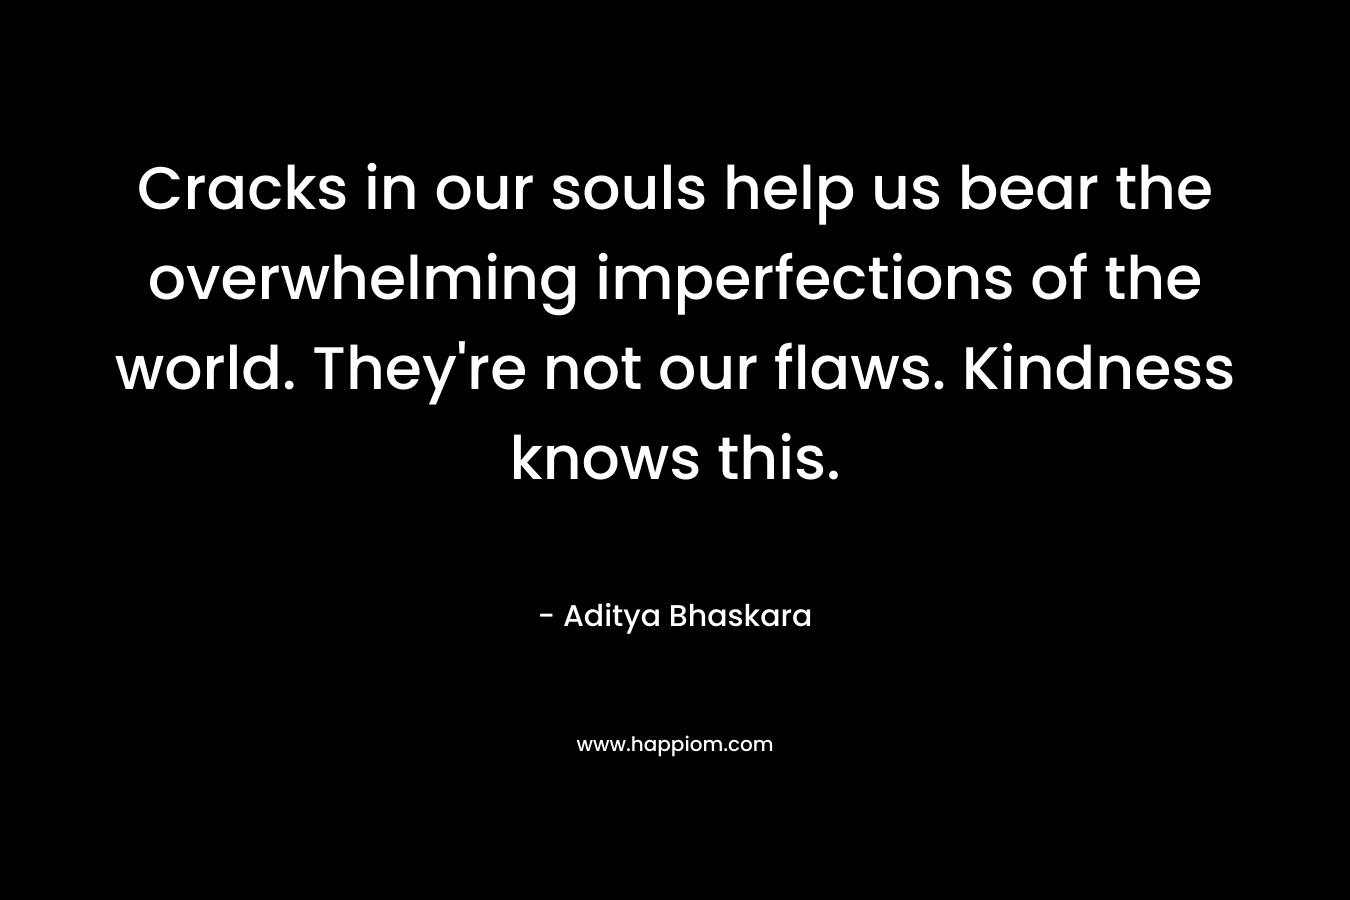 Cracks in our souls help us bear the overwhelming imperfections of the world. They're not our flaws. Kindness knows this.